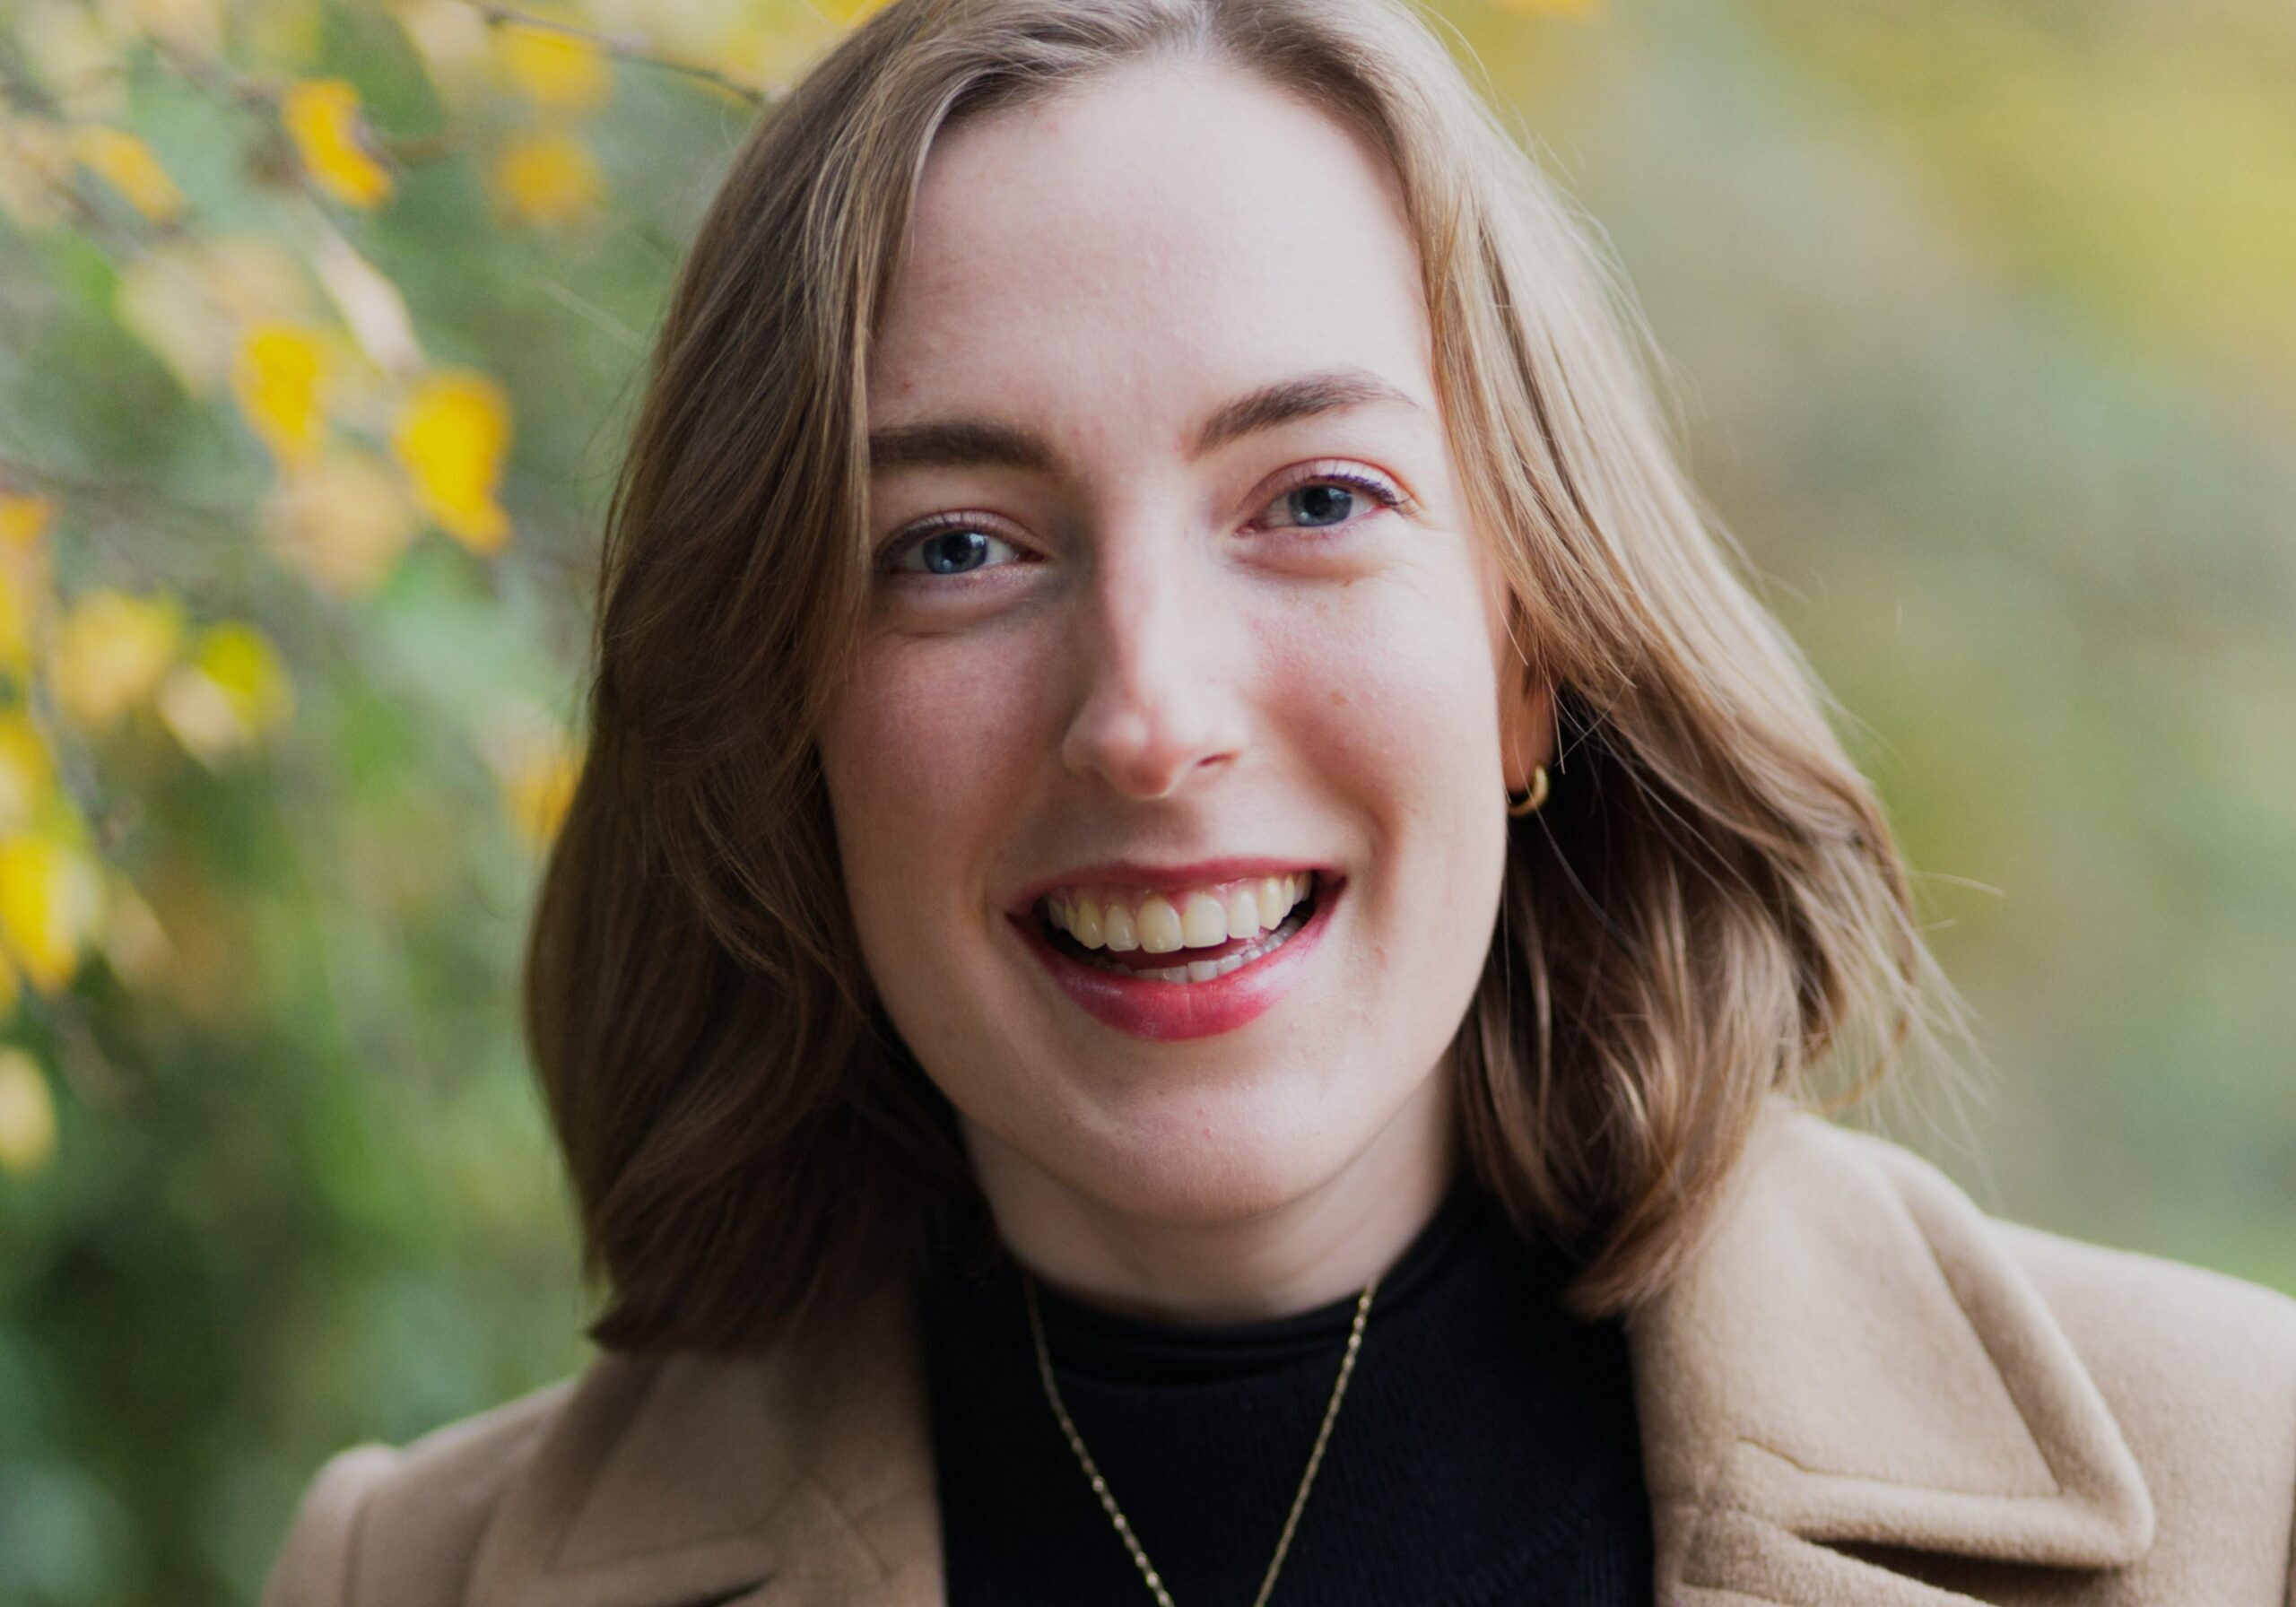 A photo of Lauren McLay smiling into camera dressed smartly with a leafy, autumnal background